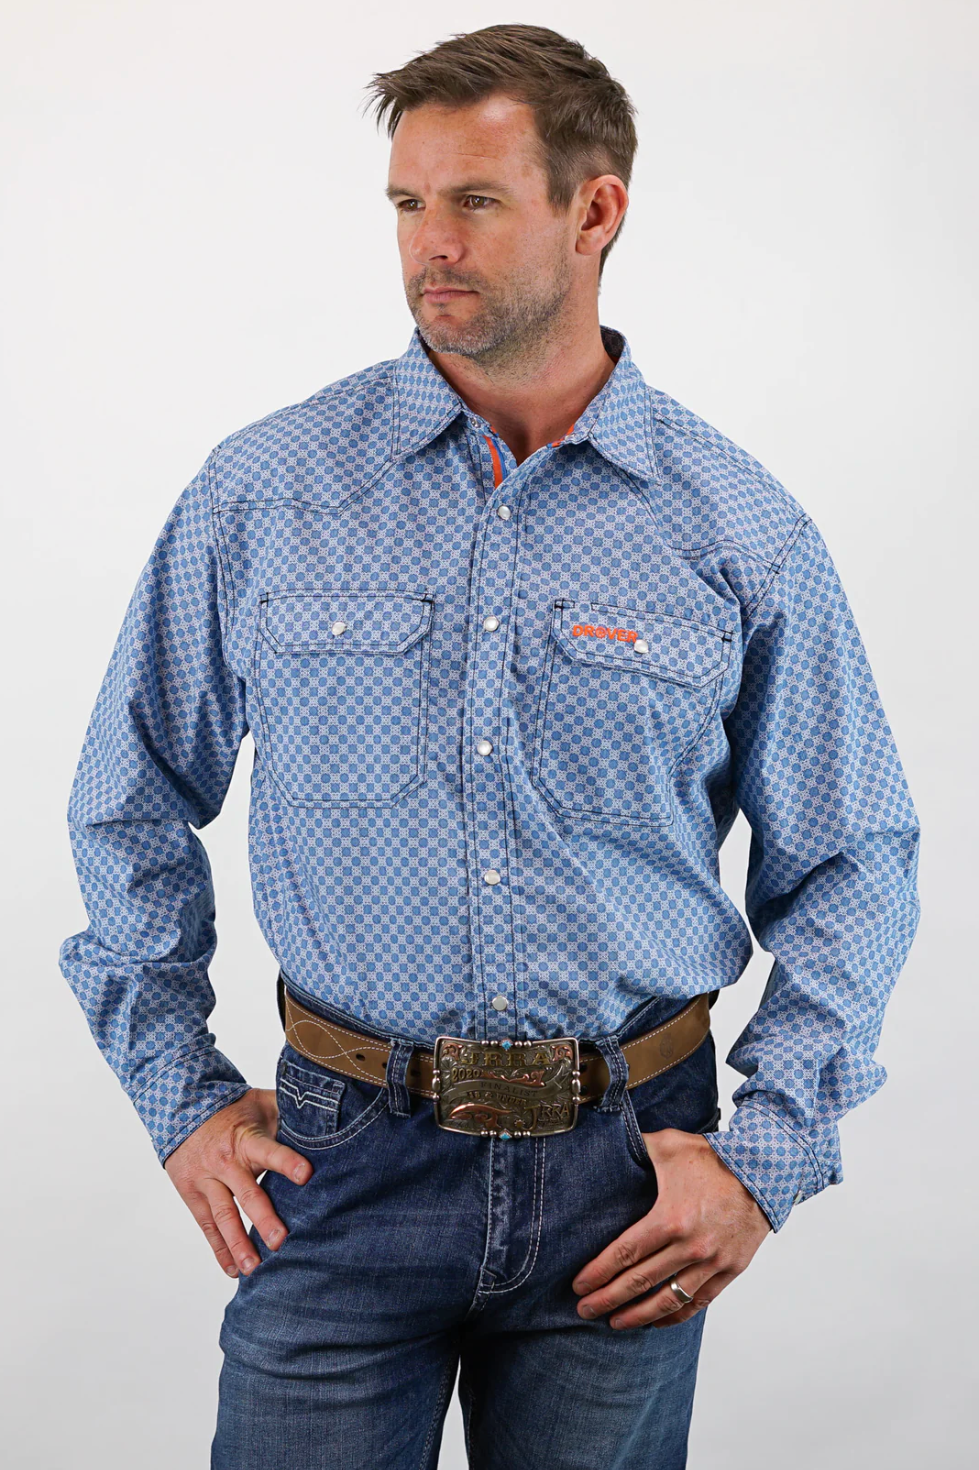 Drover Signature Series - Outlaw - Pearl Snap, Print, Option Cuff, Classic Fit Shirt (Blue Diamond)